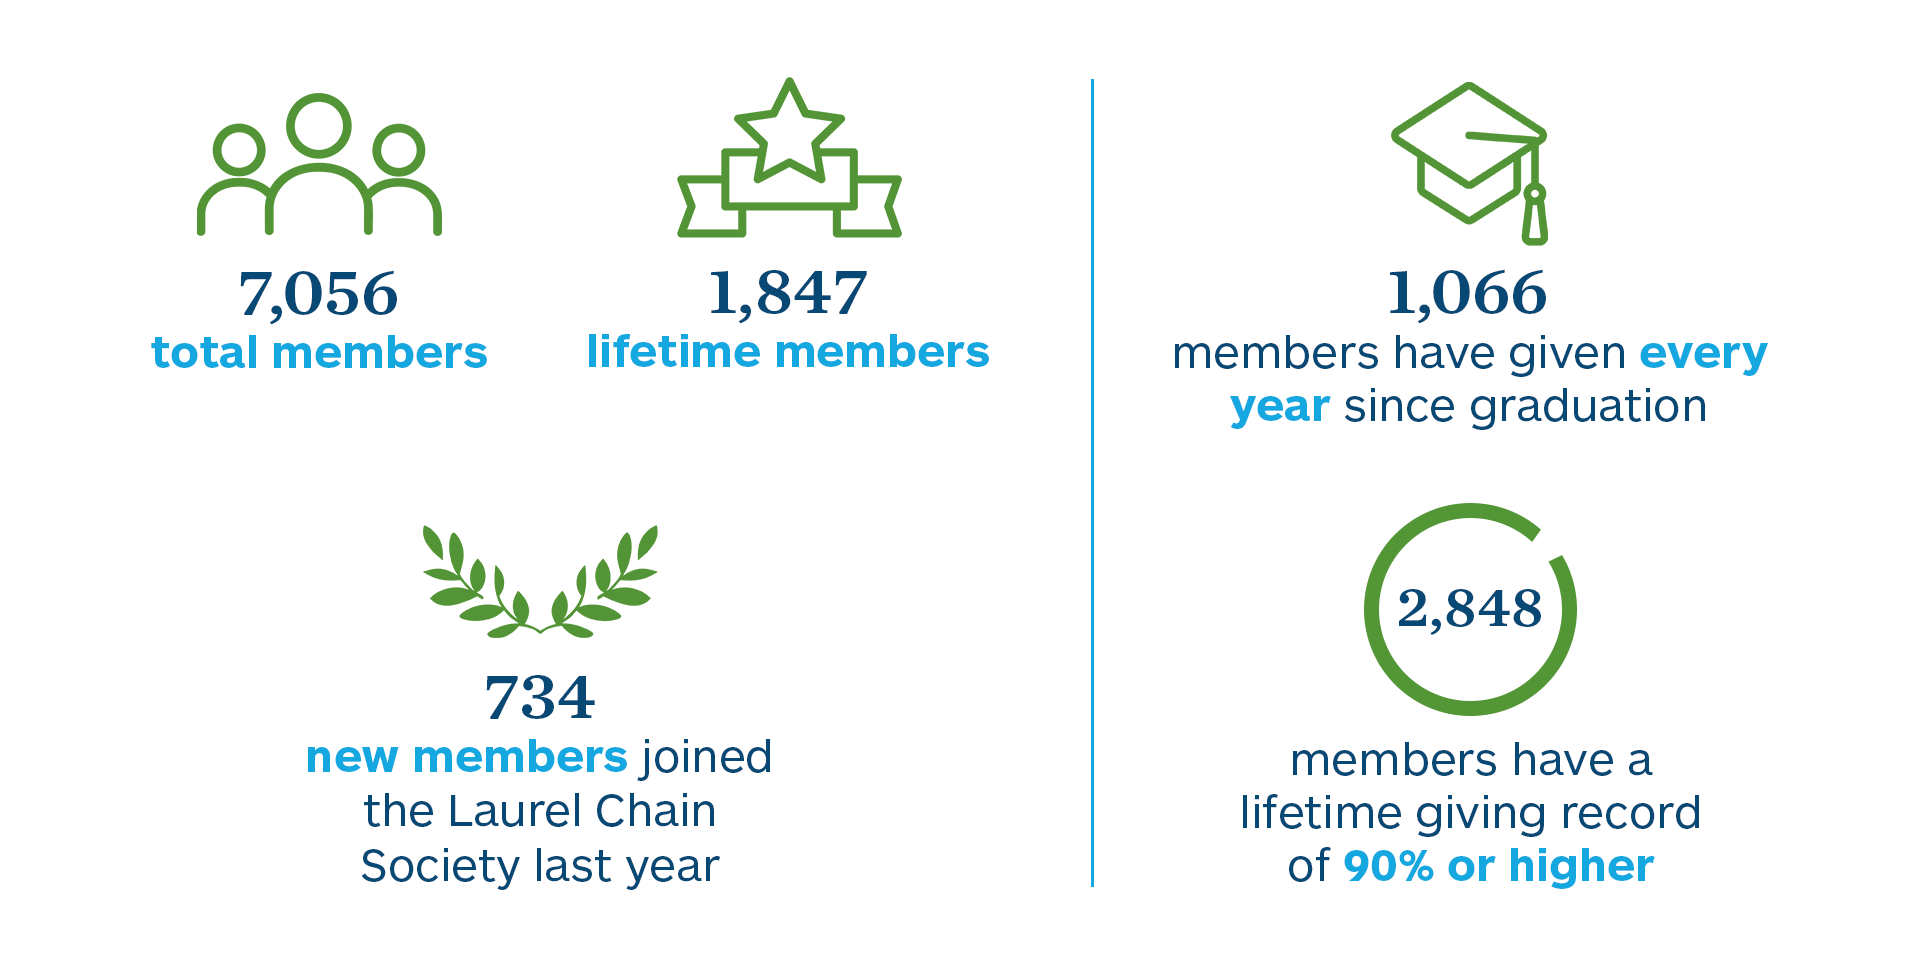 7056 total members | 1847 lifetime members | 734 new members joined the Laurel Chain Society last year | 1066 members have given every year since graduation | 2848 members have a lifetime giving record of 90% or higher